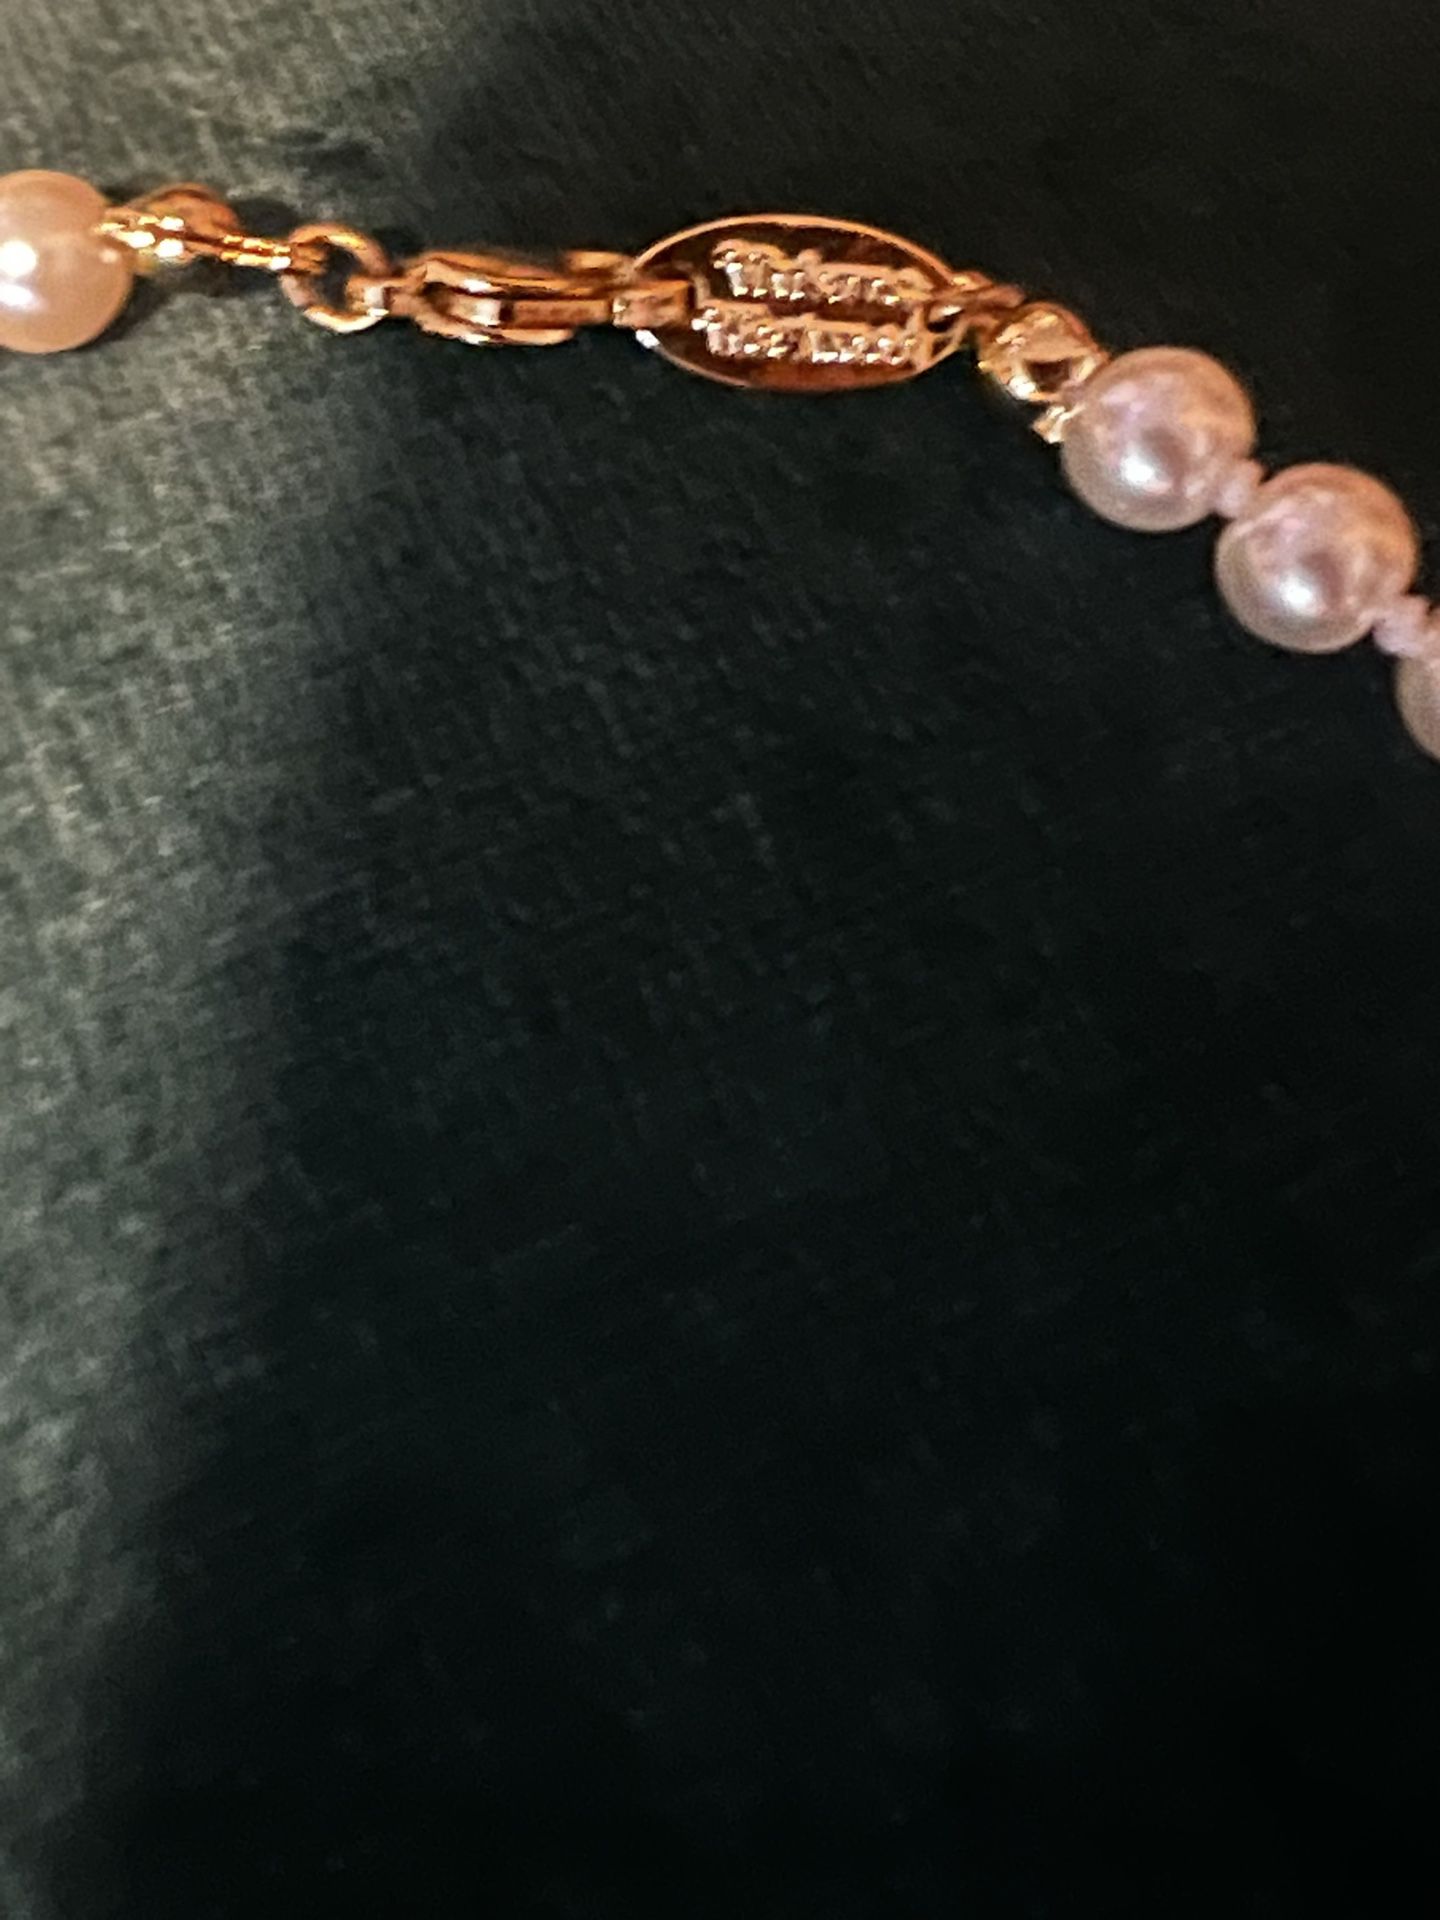 Pink Vivienne Westwood Pearl Necklace for Sale in Ontario, CA - OfferUp